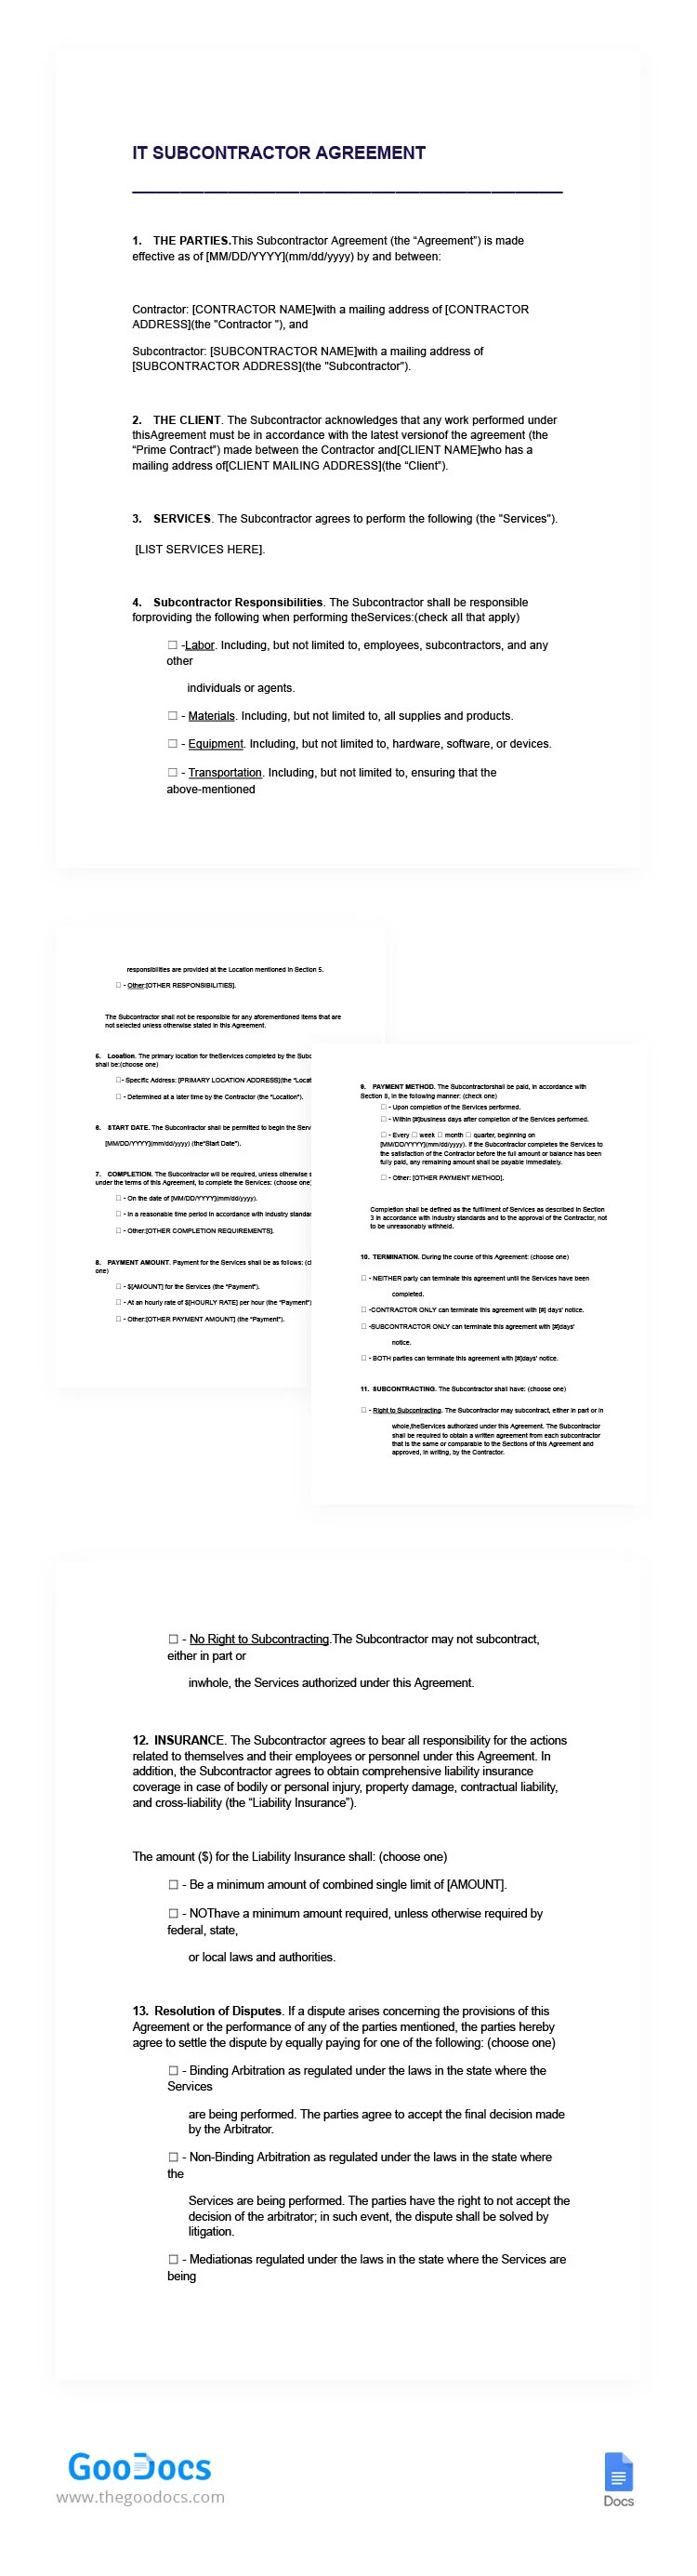 Professional IT Subcontractor Agreement - free Google Docs Template - 10066528